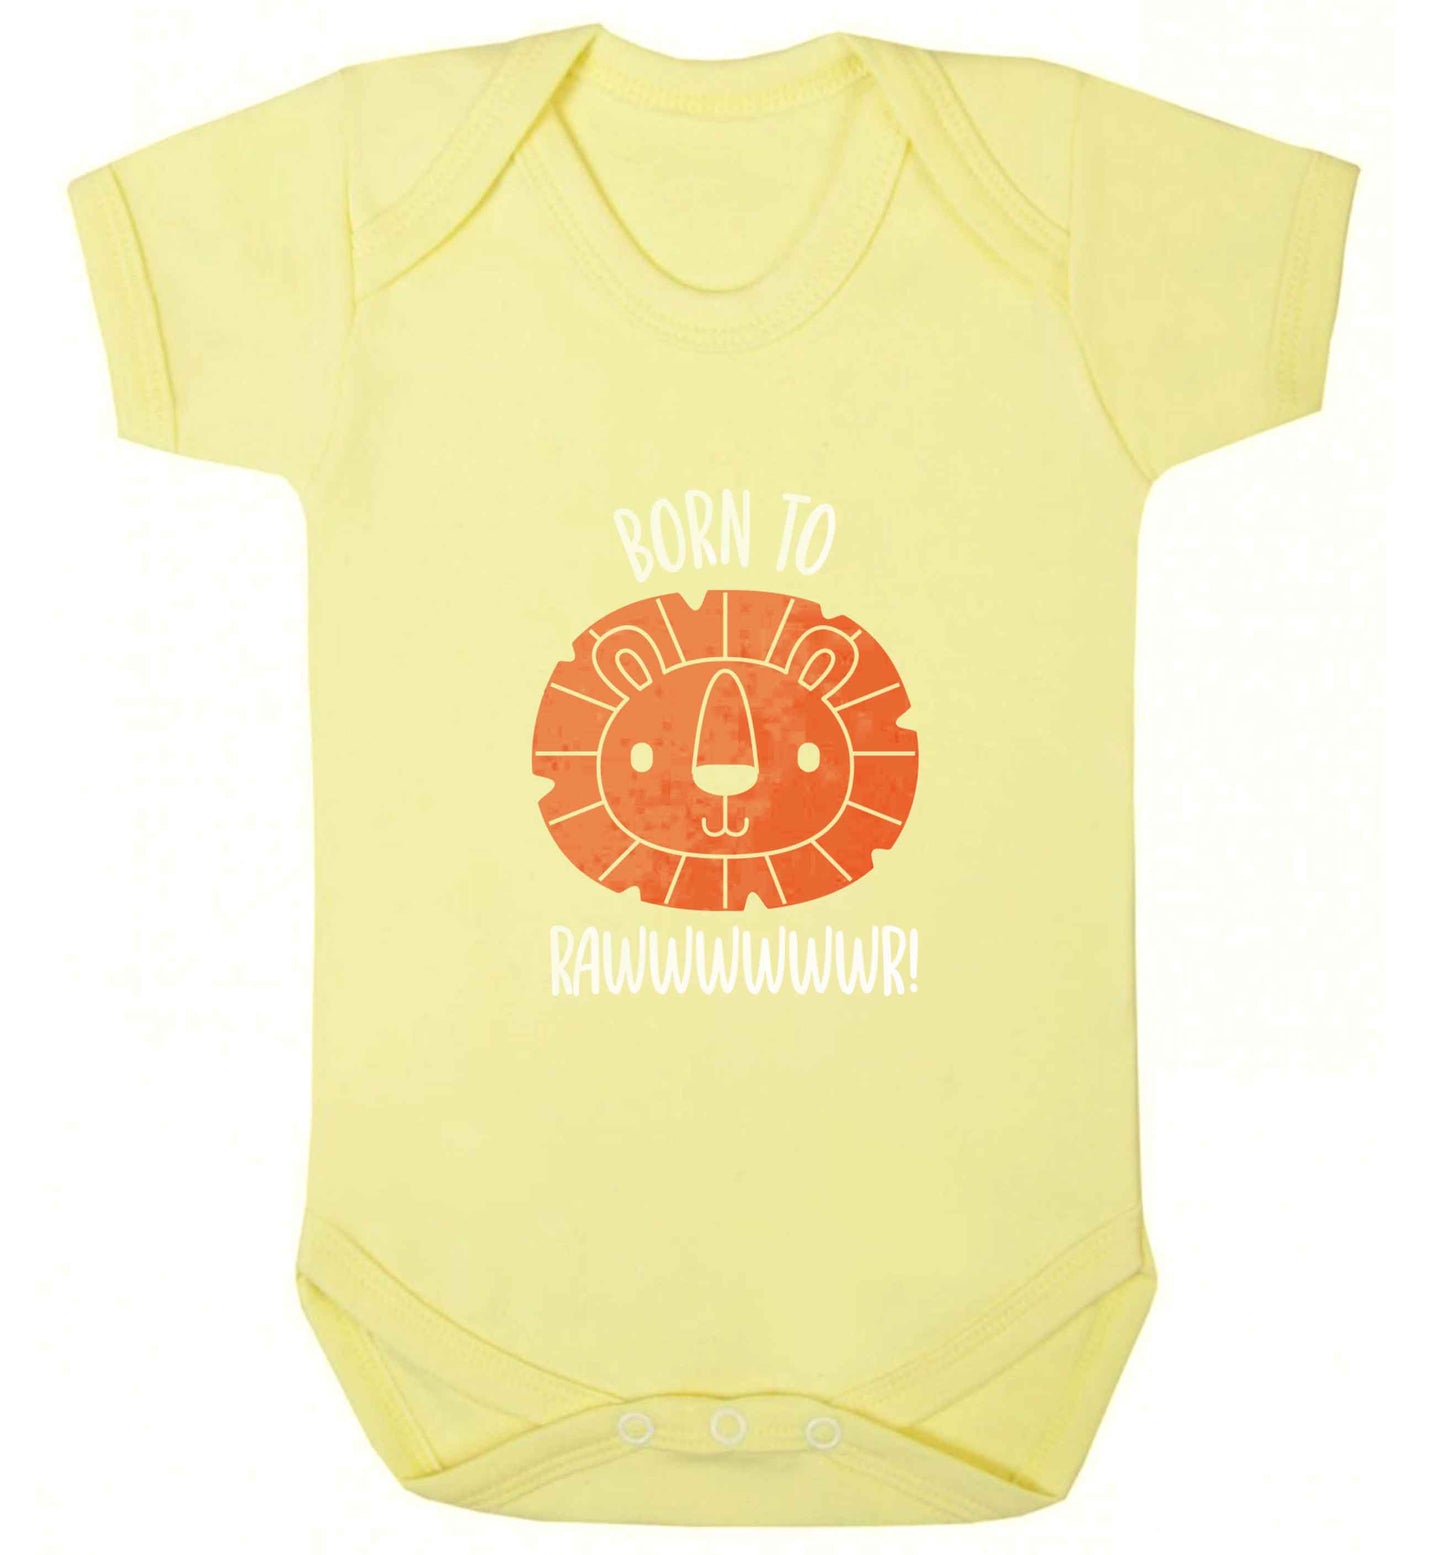 Born to rawr baby vest pale yellow 18-24 months